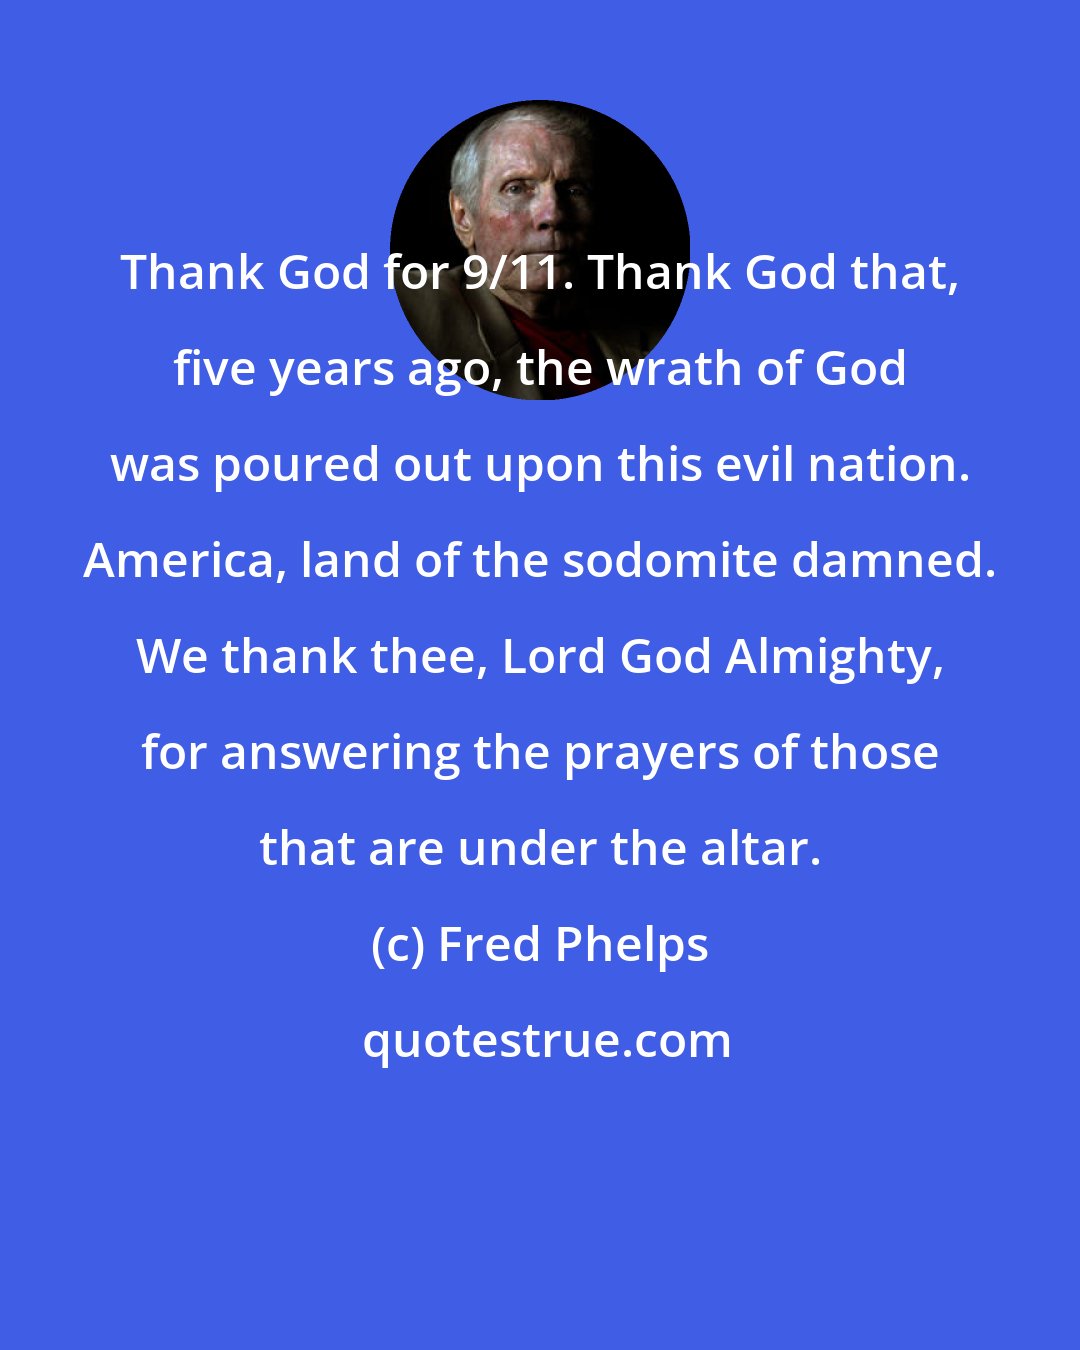 Fred Phelps: Thank God for 9/11. Thank God that, five years ago, the wrath of God was poured out upon this evil nation. America, land of the sodomite damned. We thank thee, Lord God Almighty, for answering the prayers of those that are under the altar.